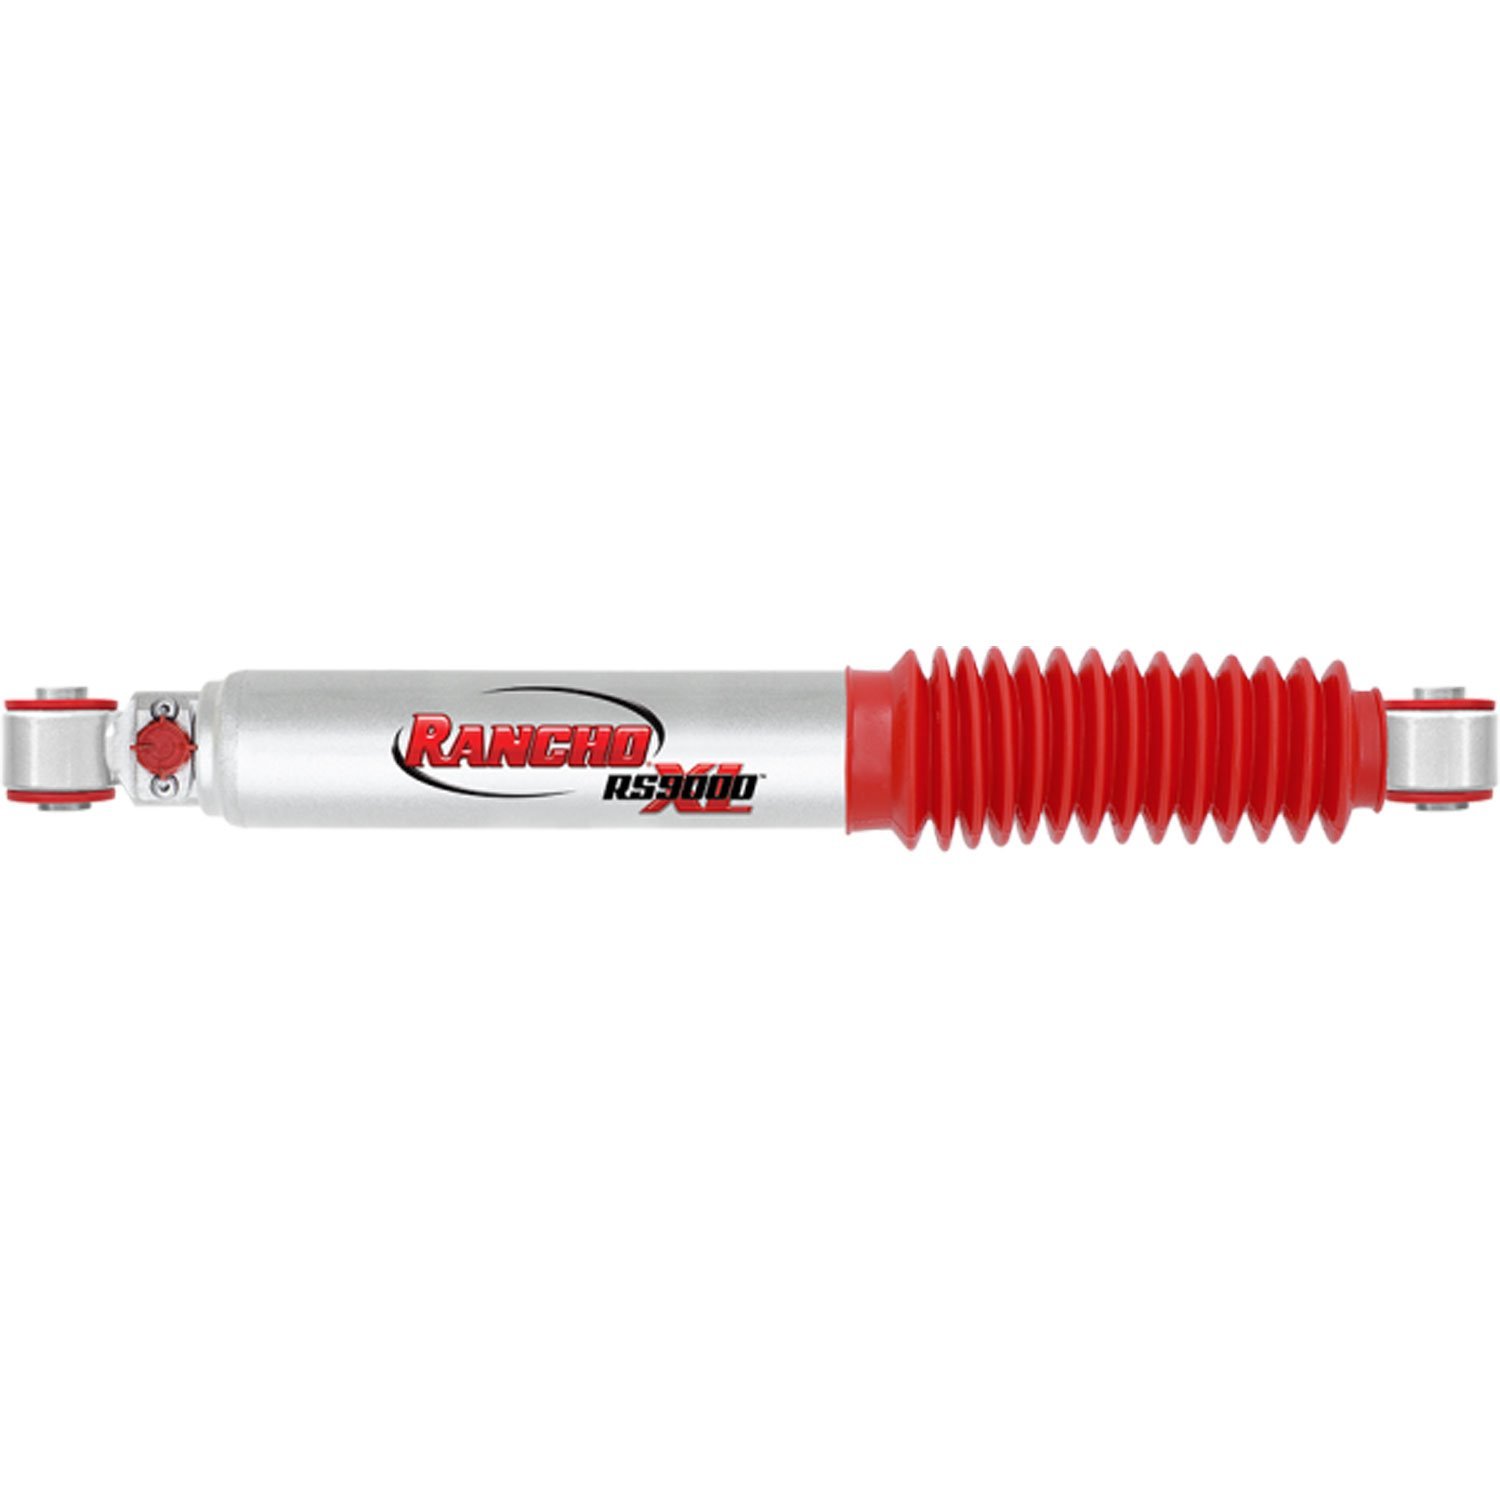 RS9000XL Rear Shock Absorber Fits GM Fullsize SUVs and Dodge Ram 2500